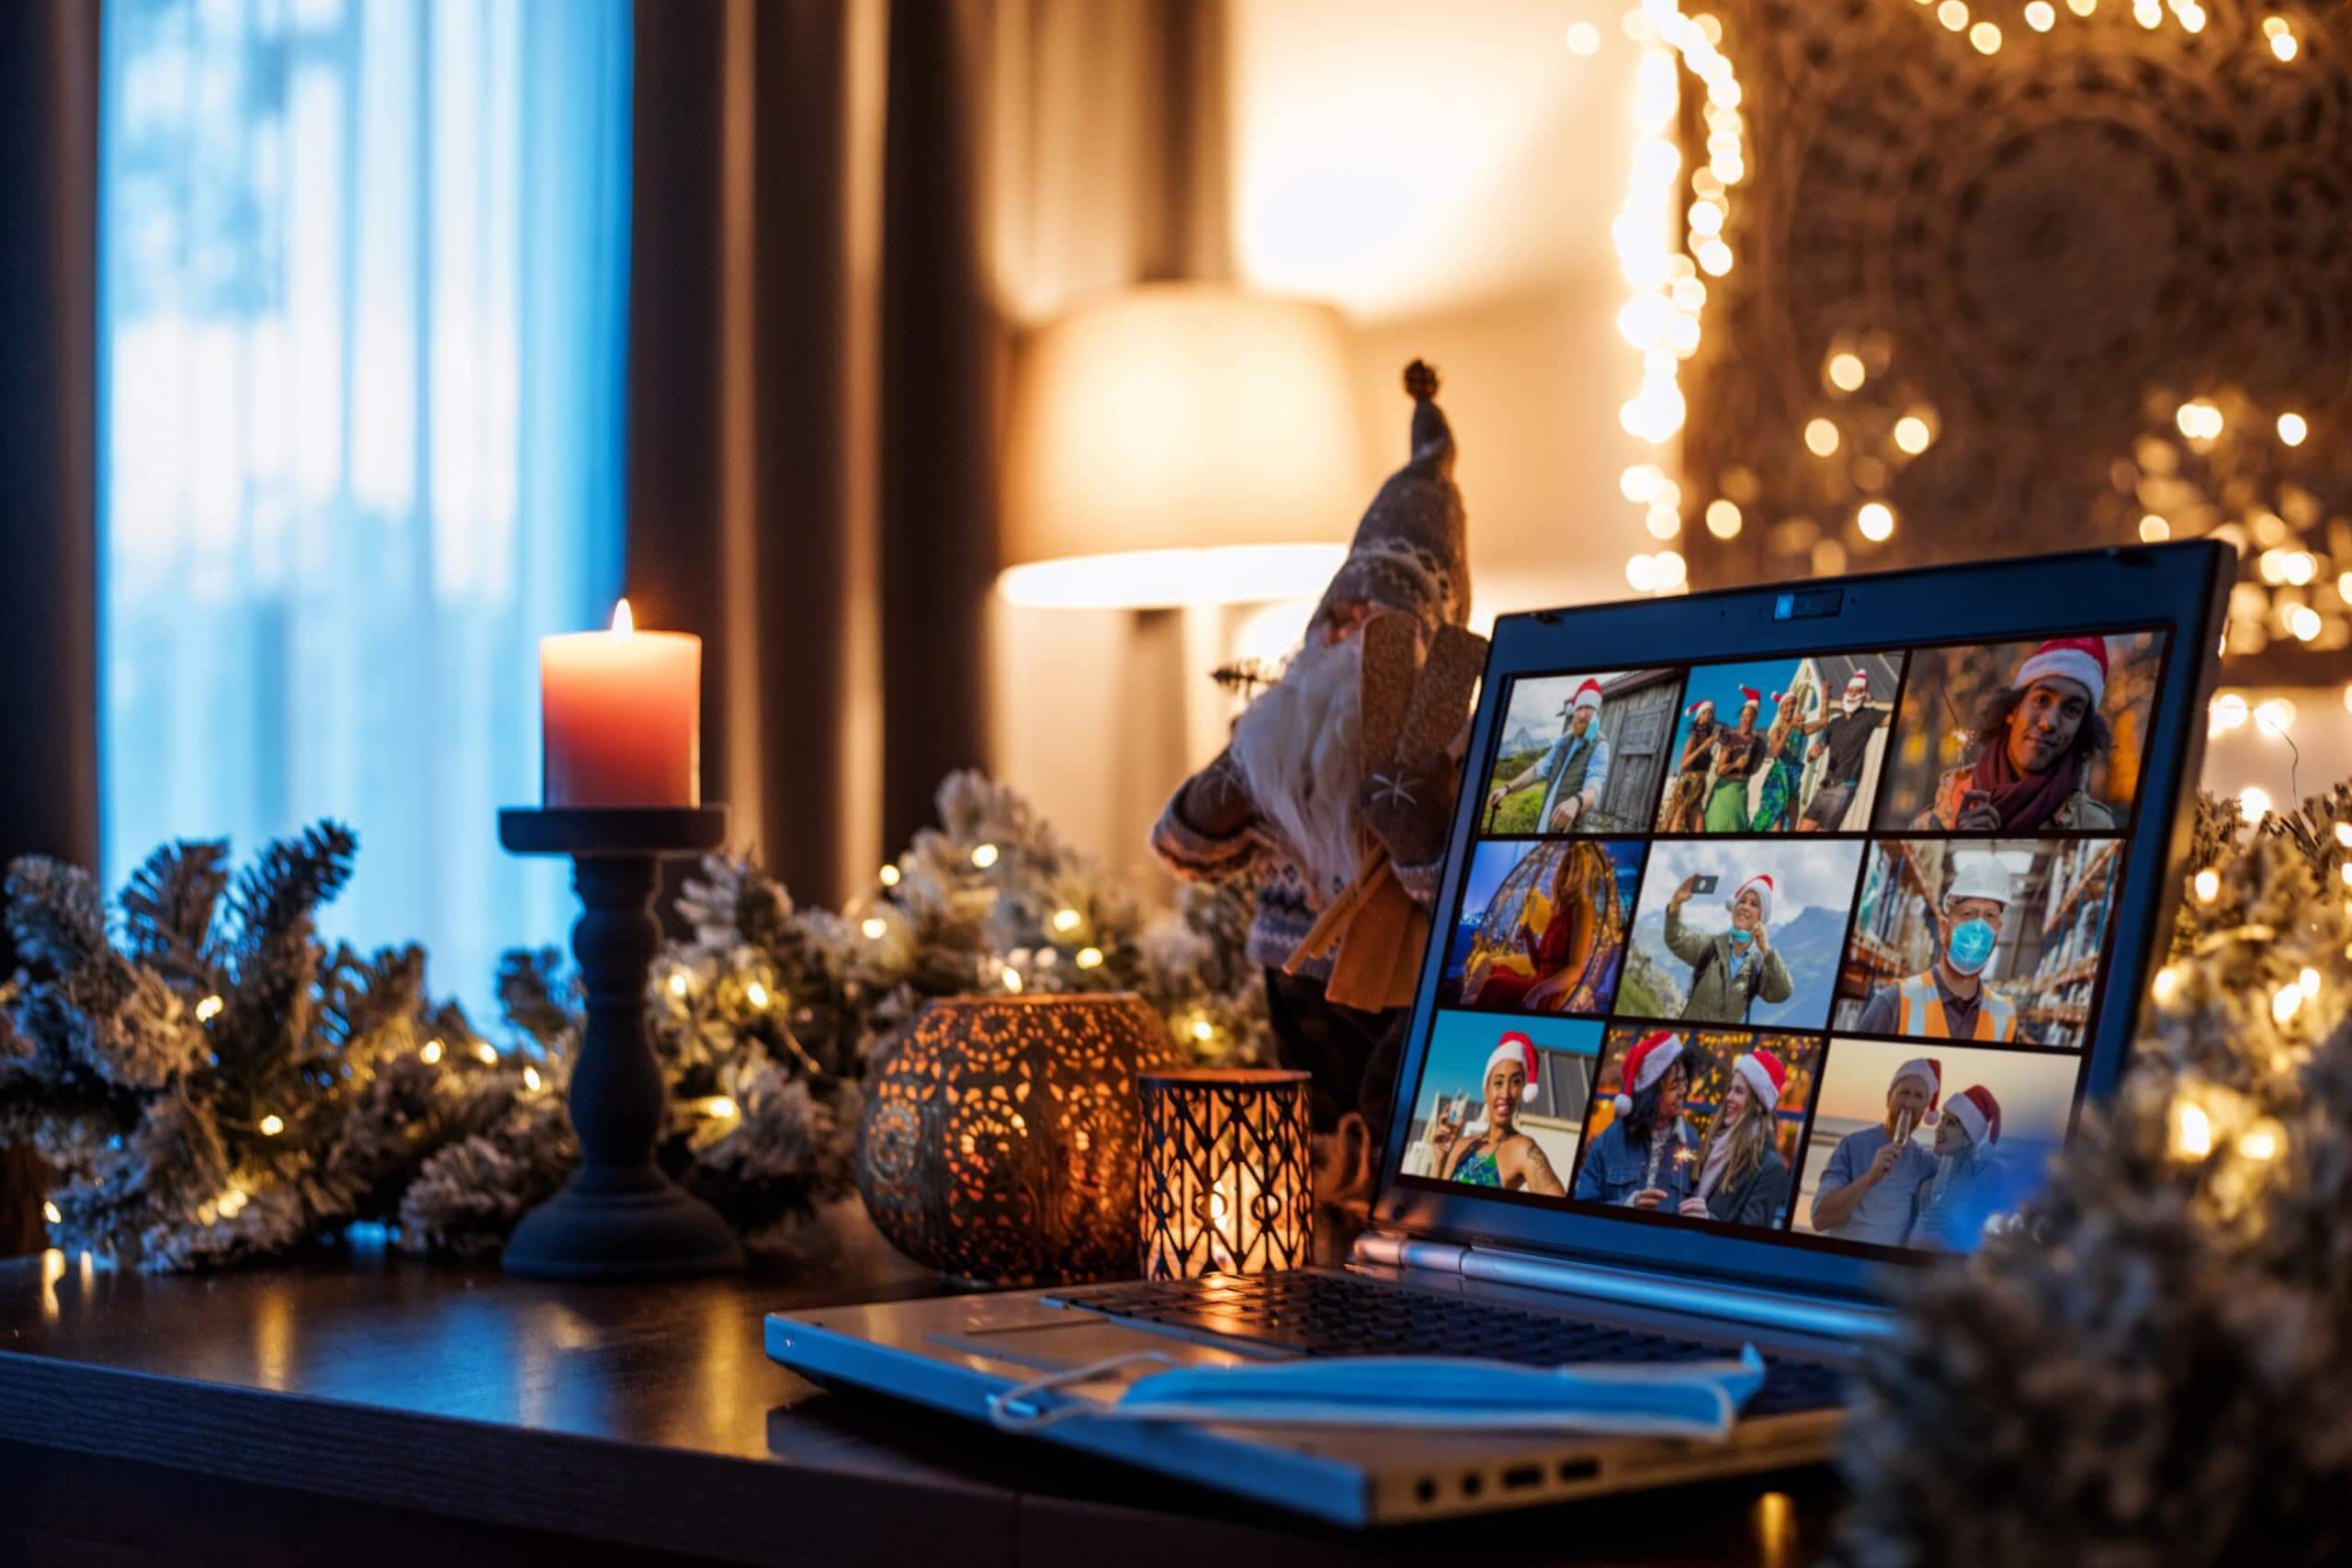 Laptop surrounded by holiday decor showing zoom screen of family members celebrating